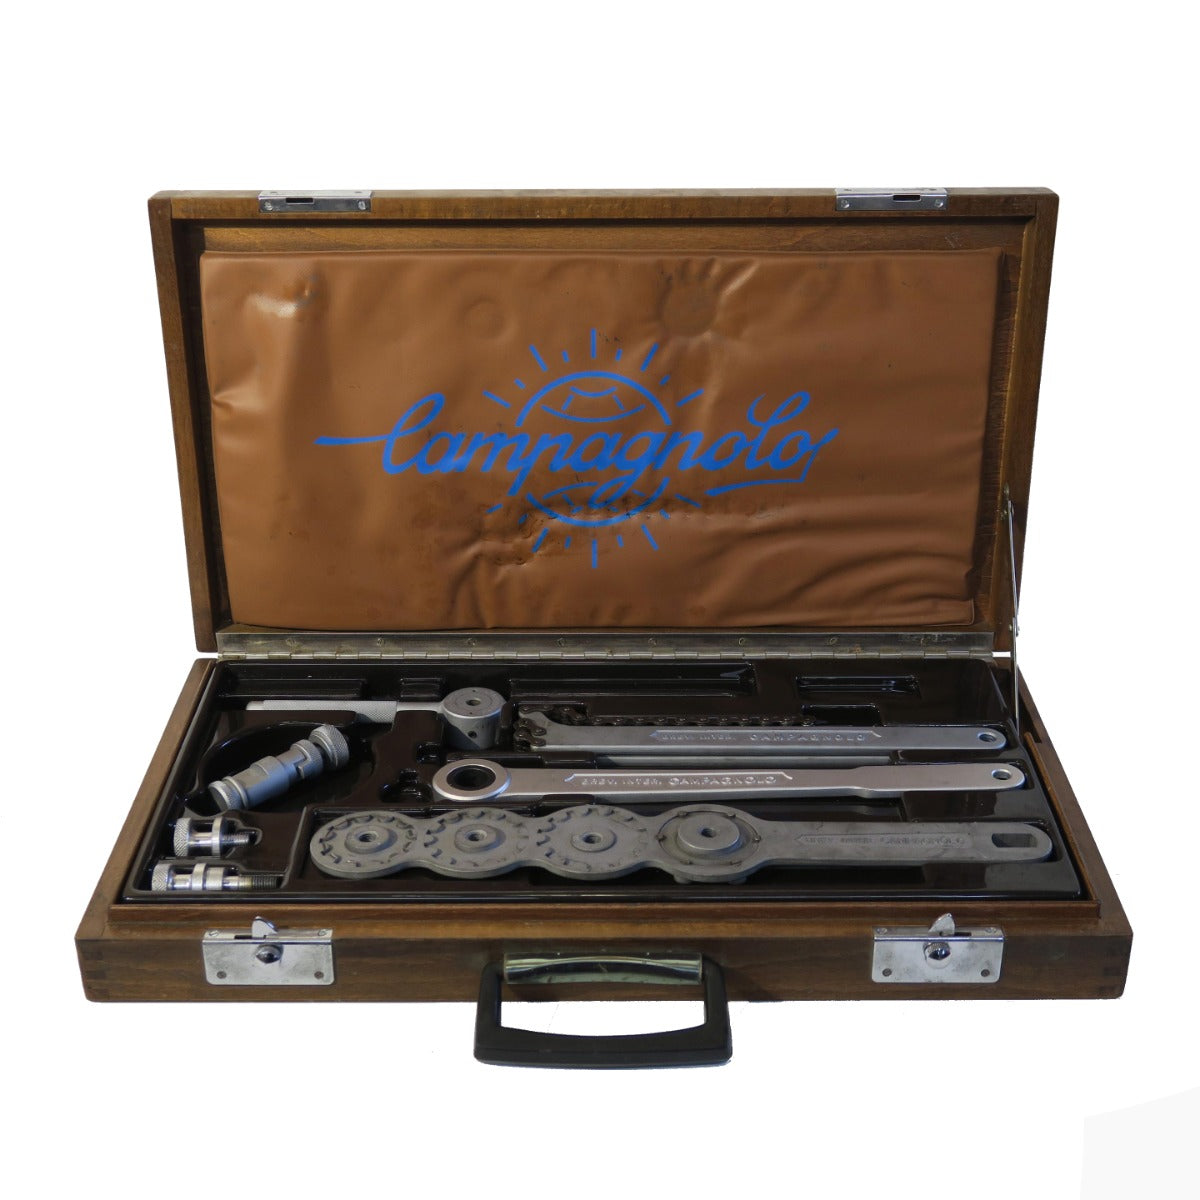 Campagnolo Freewheel Tool Kit in Wooden Box